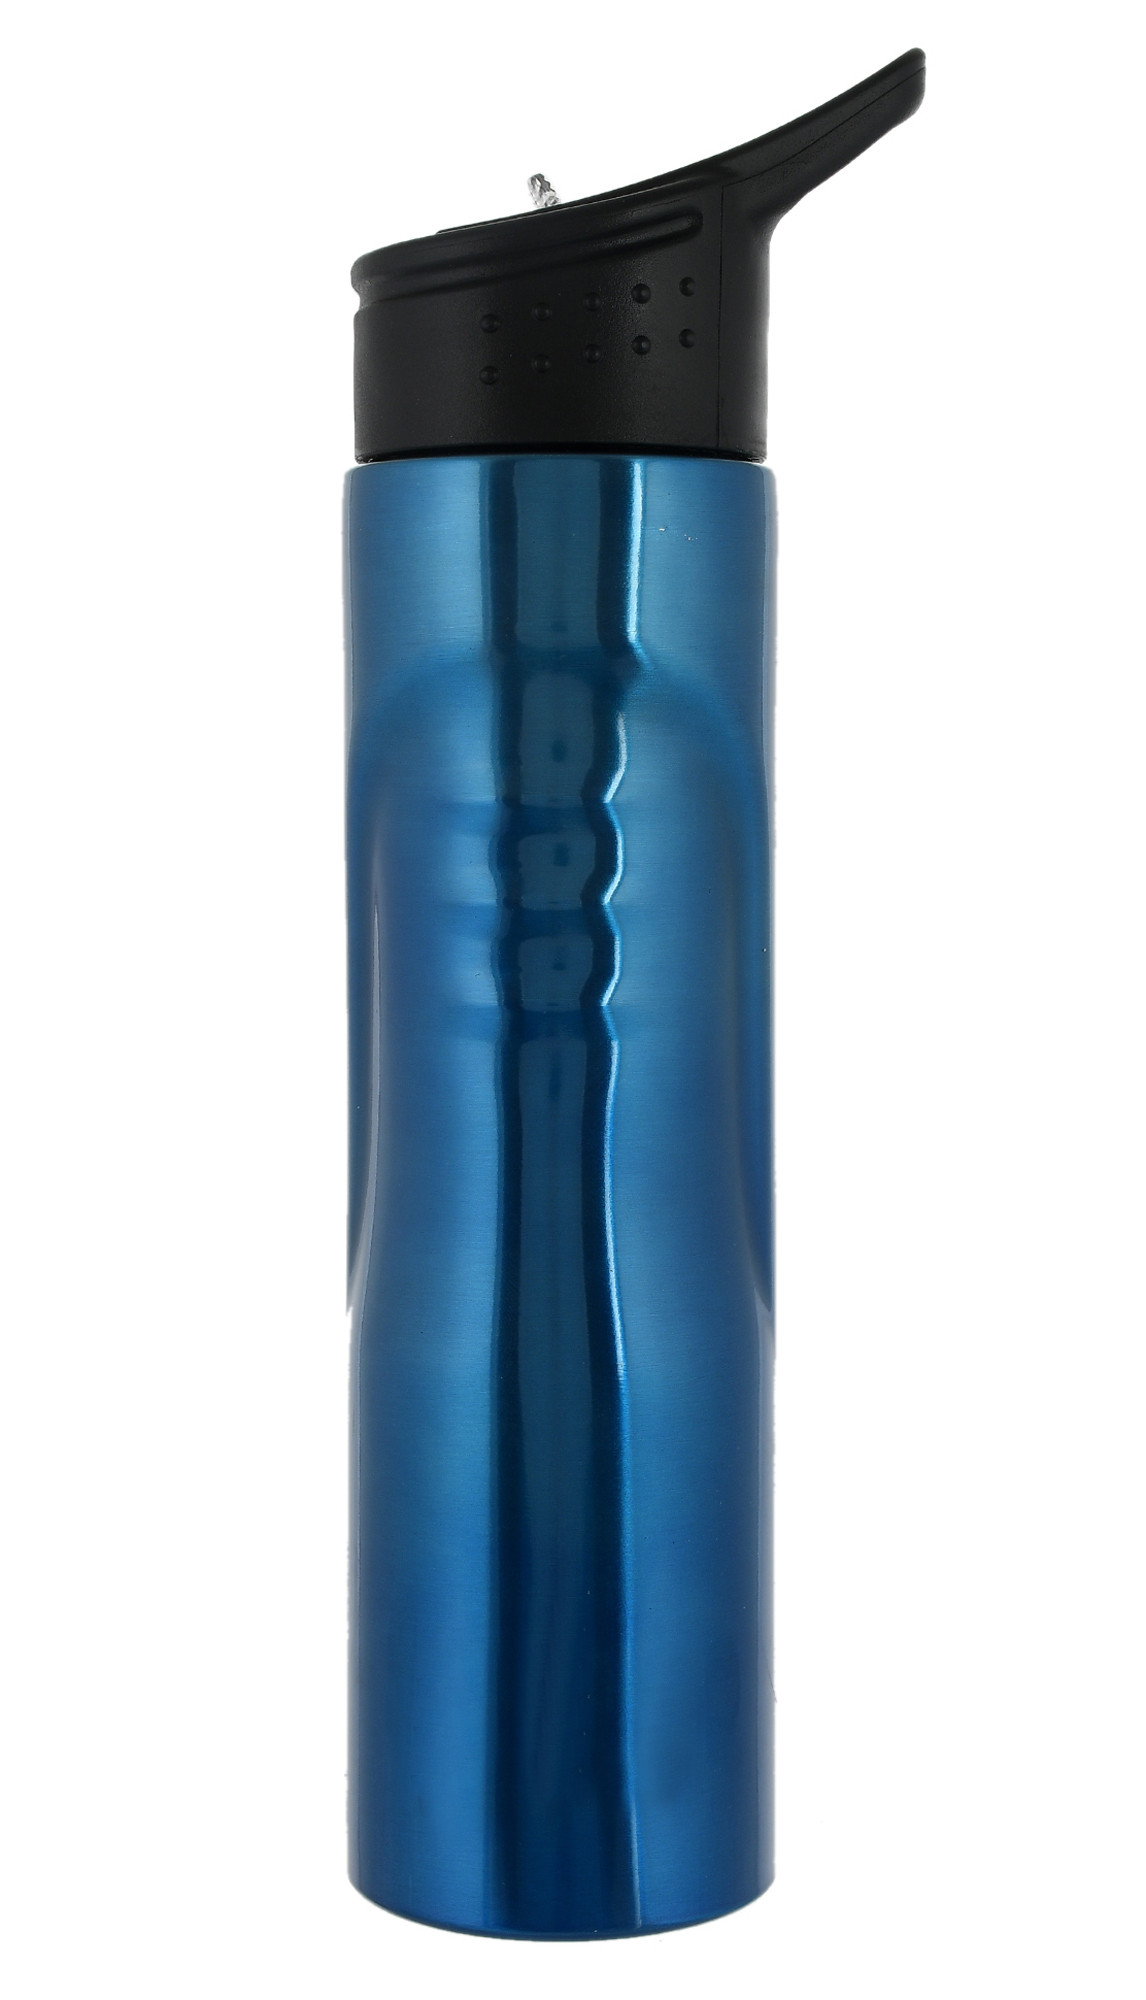 Kuber Industries Stainless Steel BPA Free Drinking Bottle, Leakproof Gym Bottle, Ideal for Sports, Bike, Running, Hiking With Lid Sipper, 700ml (Blue)